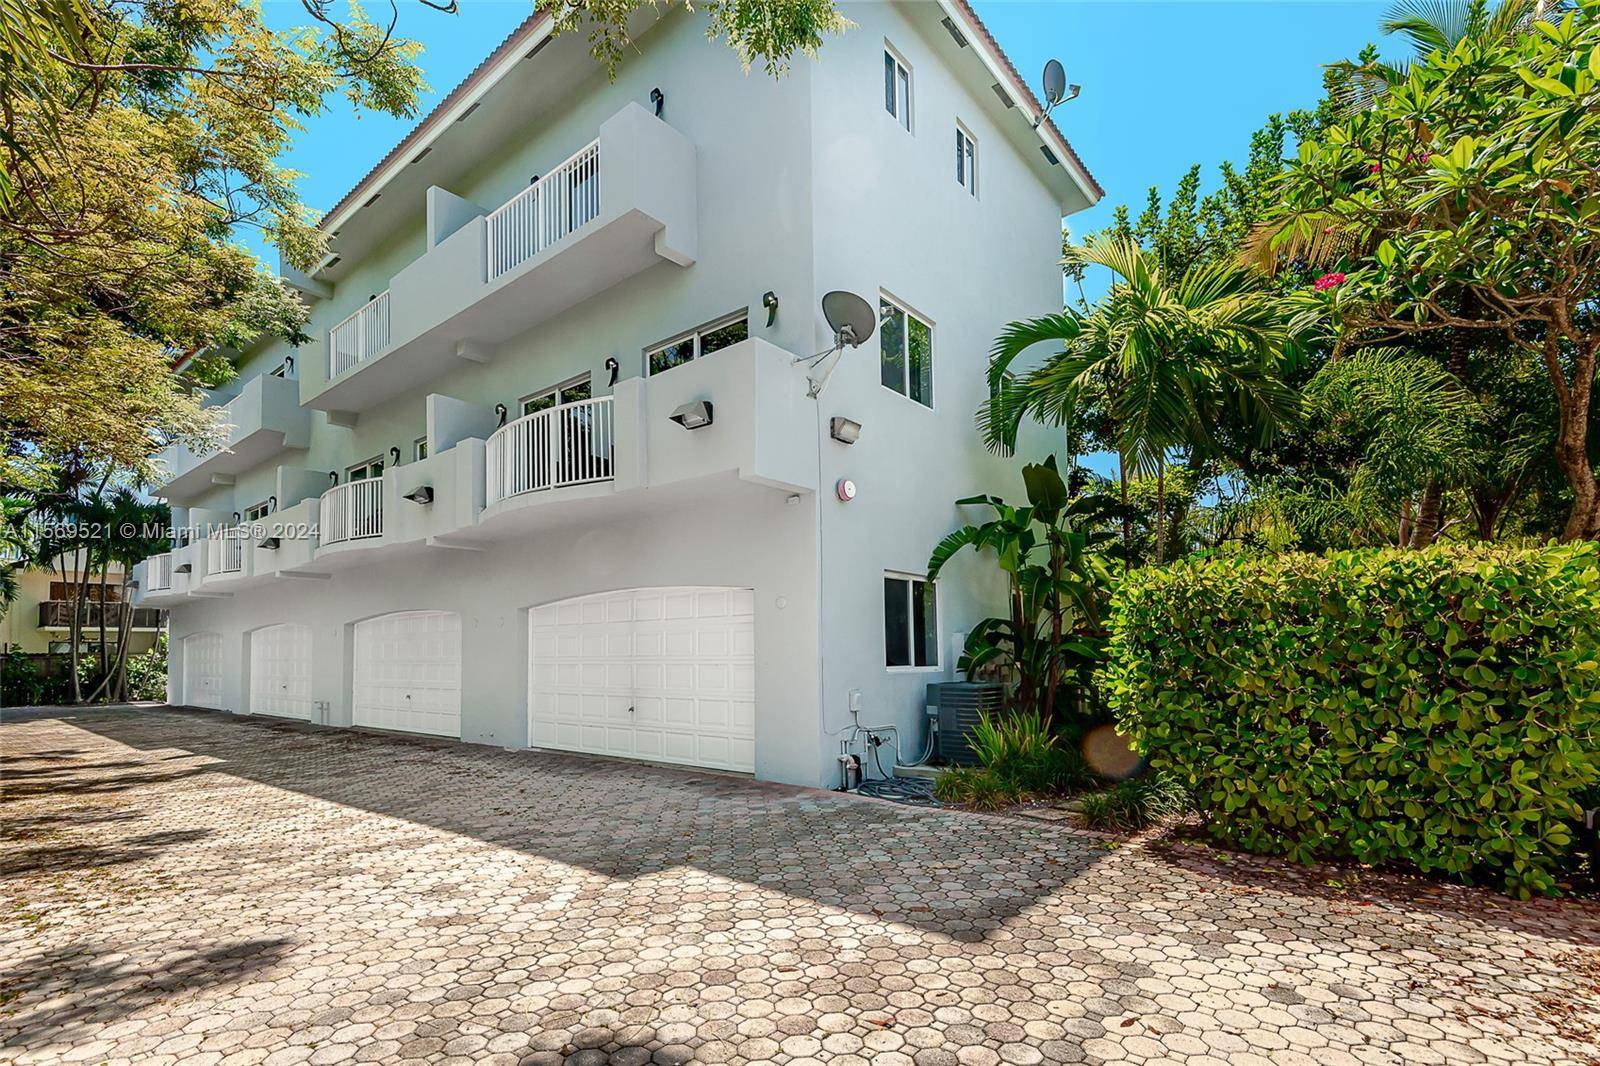 Great opportunity to own a great multifamily 4 plex property in Coconut Grove built in 2008.